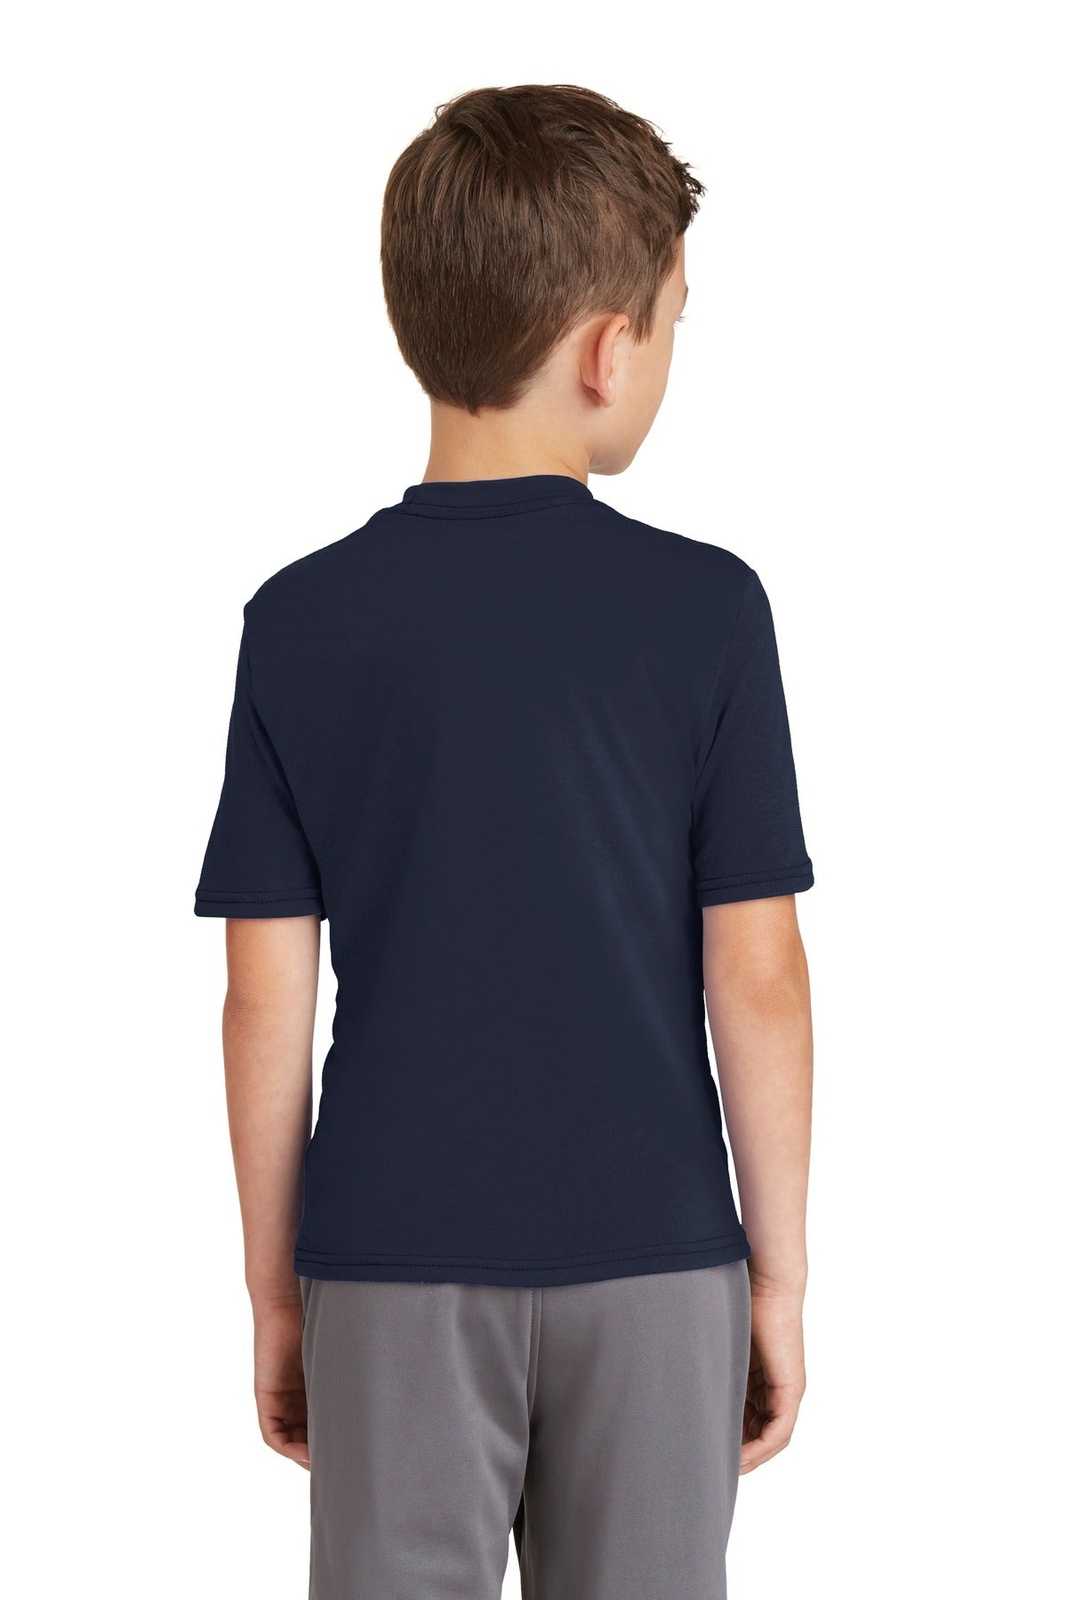 Port &amp; Company PC381Y Youth Performance Blend Tee - Deep Navy - HIT a Double - 2